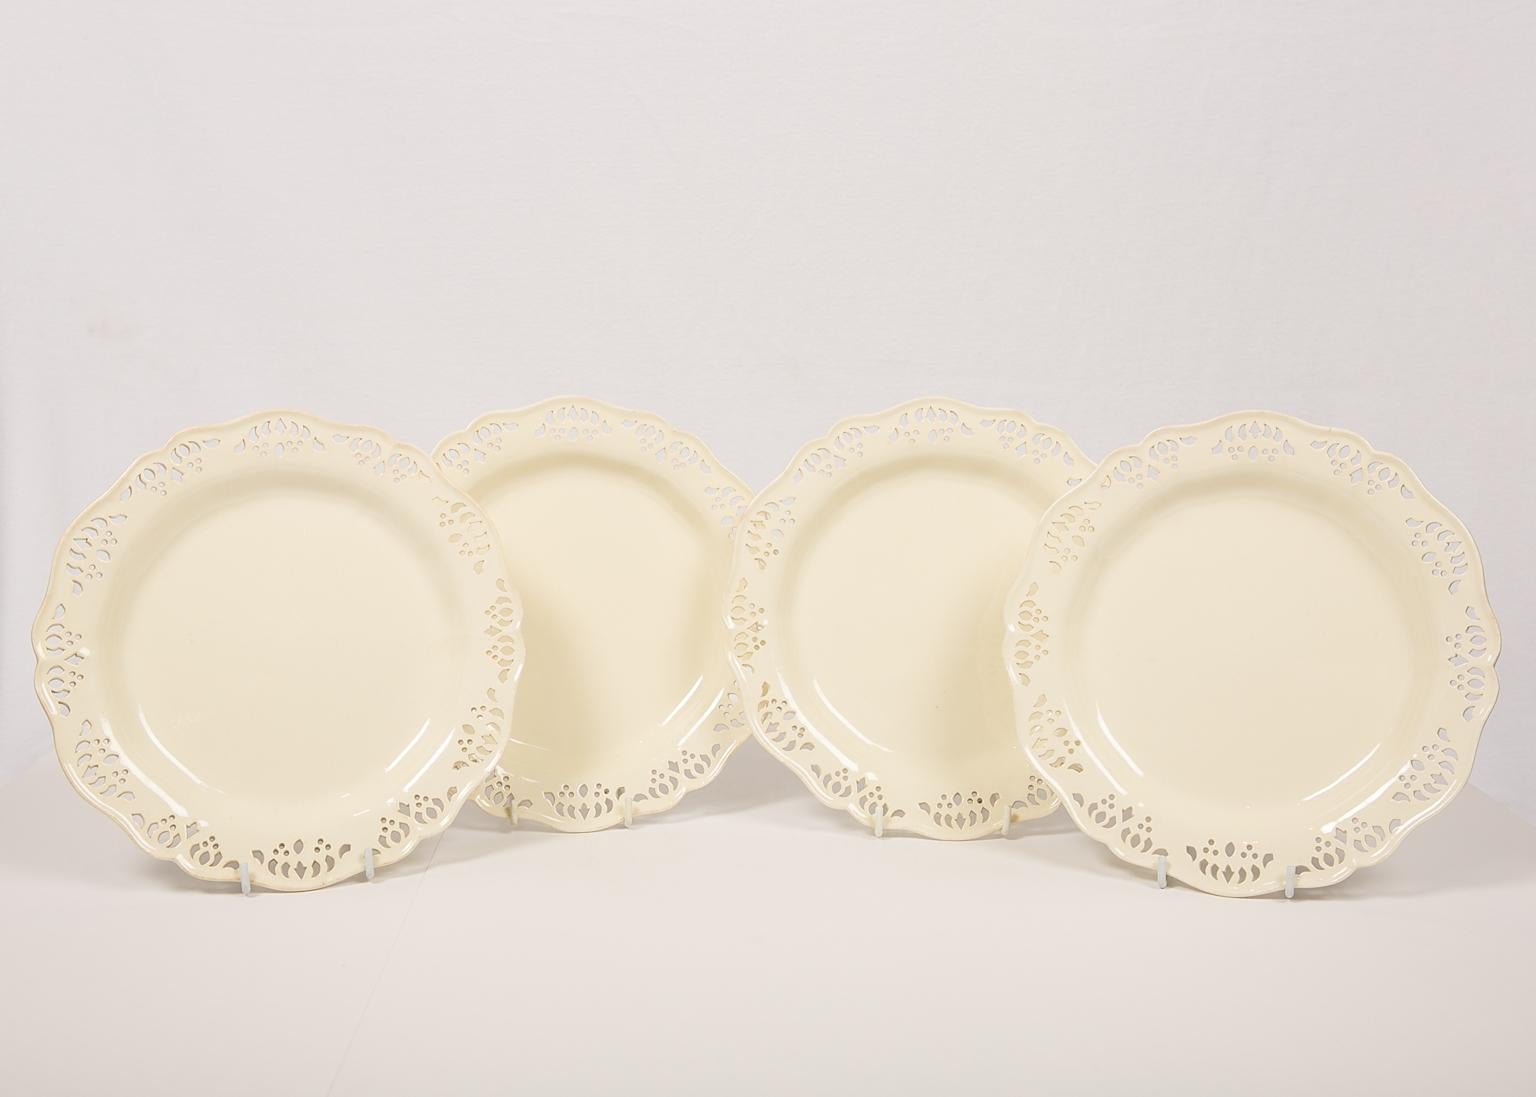 We are pleased to offer this group of four antique Wedgwood pierced creamware dishes made in 18th century England, circa 1785.
The dishes have twelve groups of piercings, and a slightly raised and scalloped edge. They are lightly potted. The overall